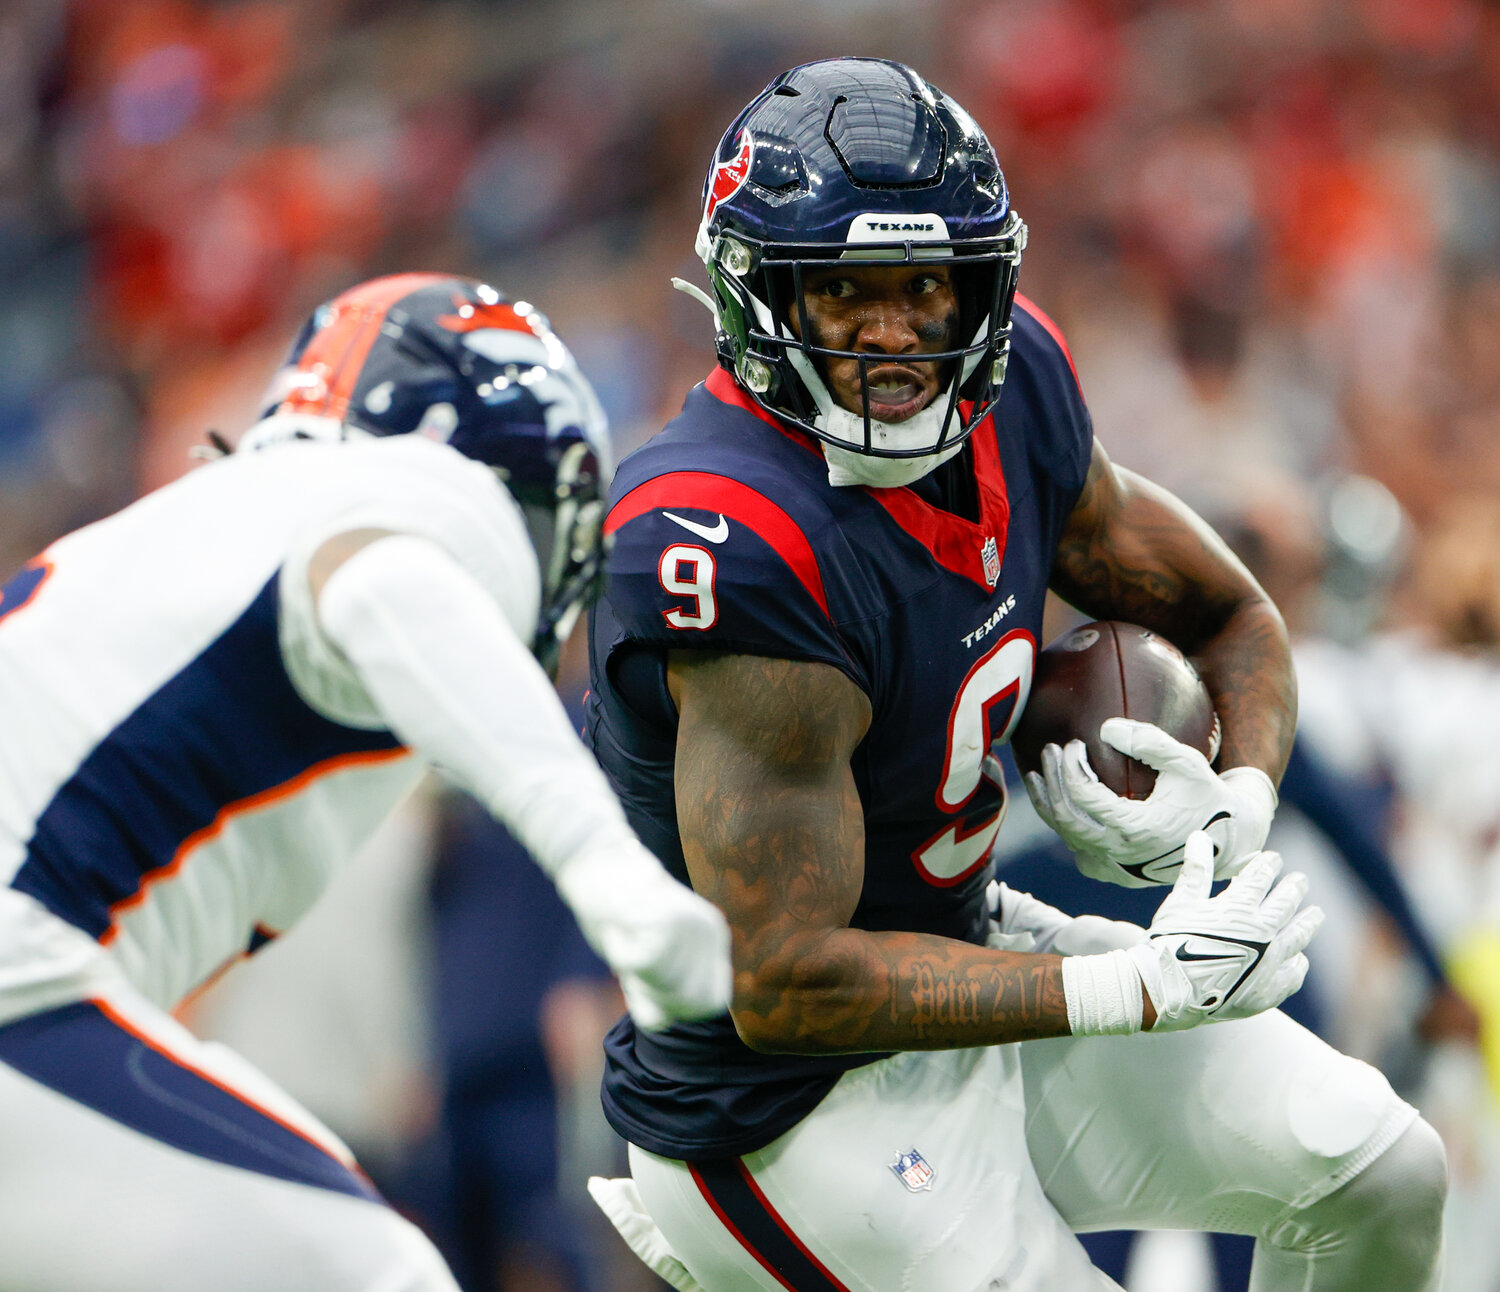 Texans tight end Brevin Jordan (9) carries the ball after a catch during an NFL game between the Texans and the Broncos on December 3, 2023 in Houston. The Texans won, 22-17.